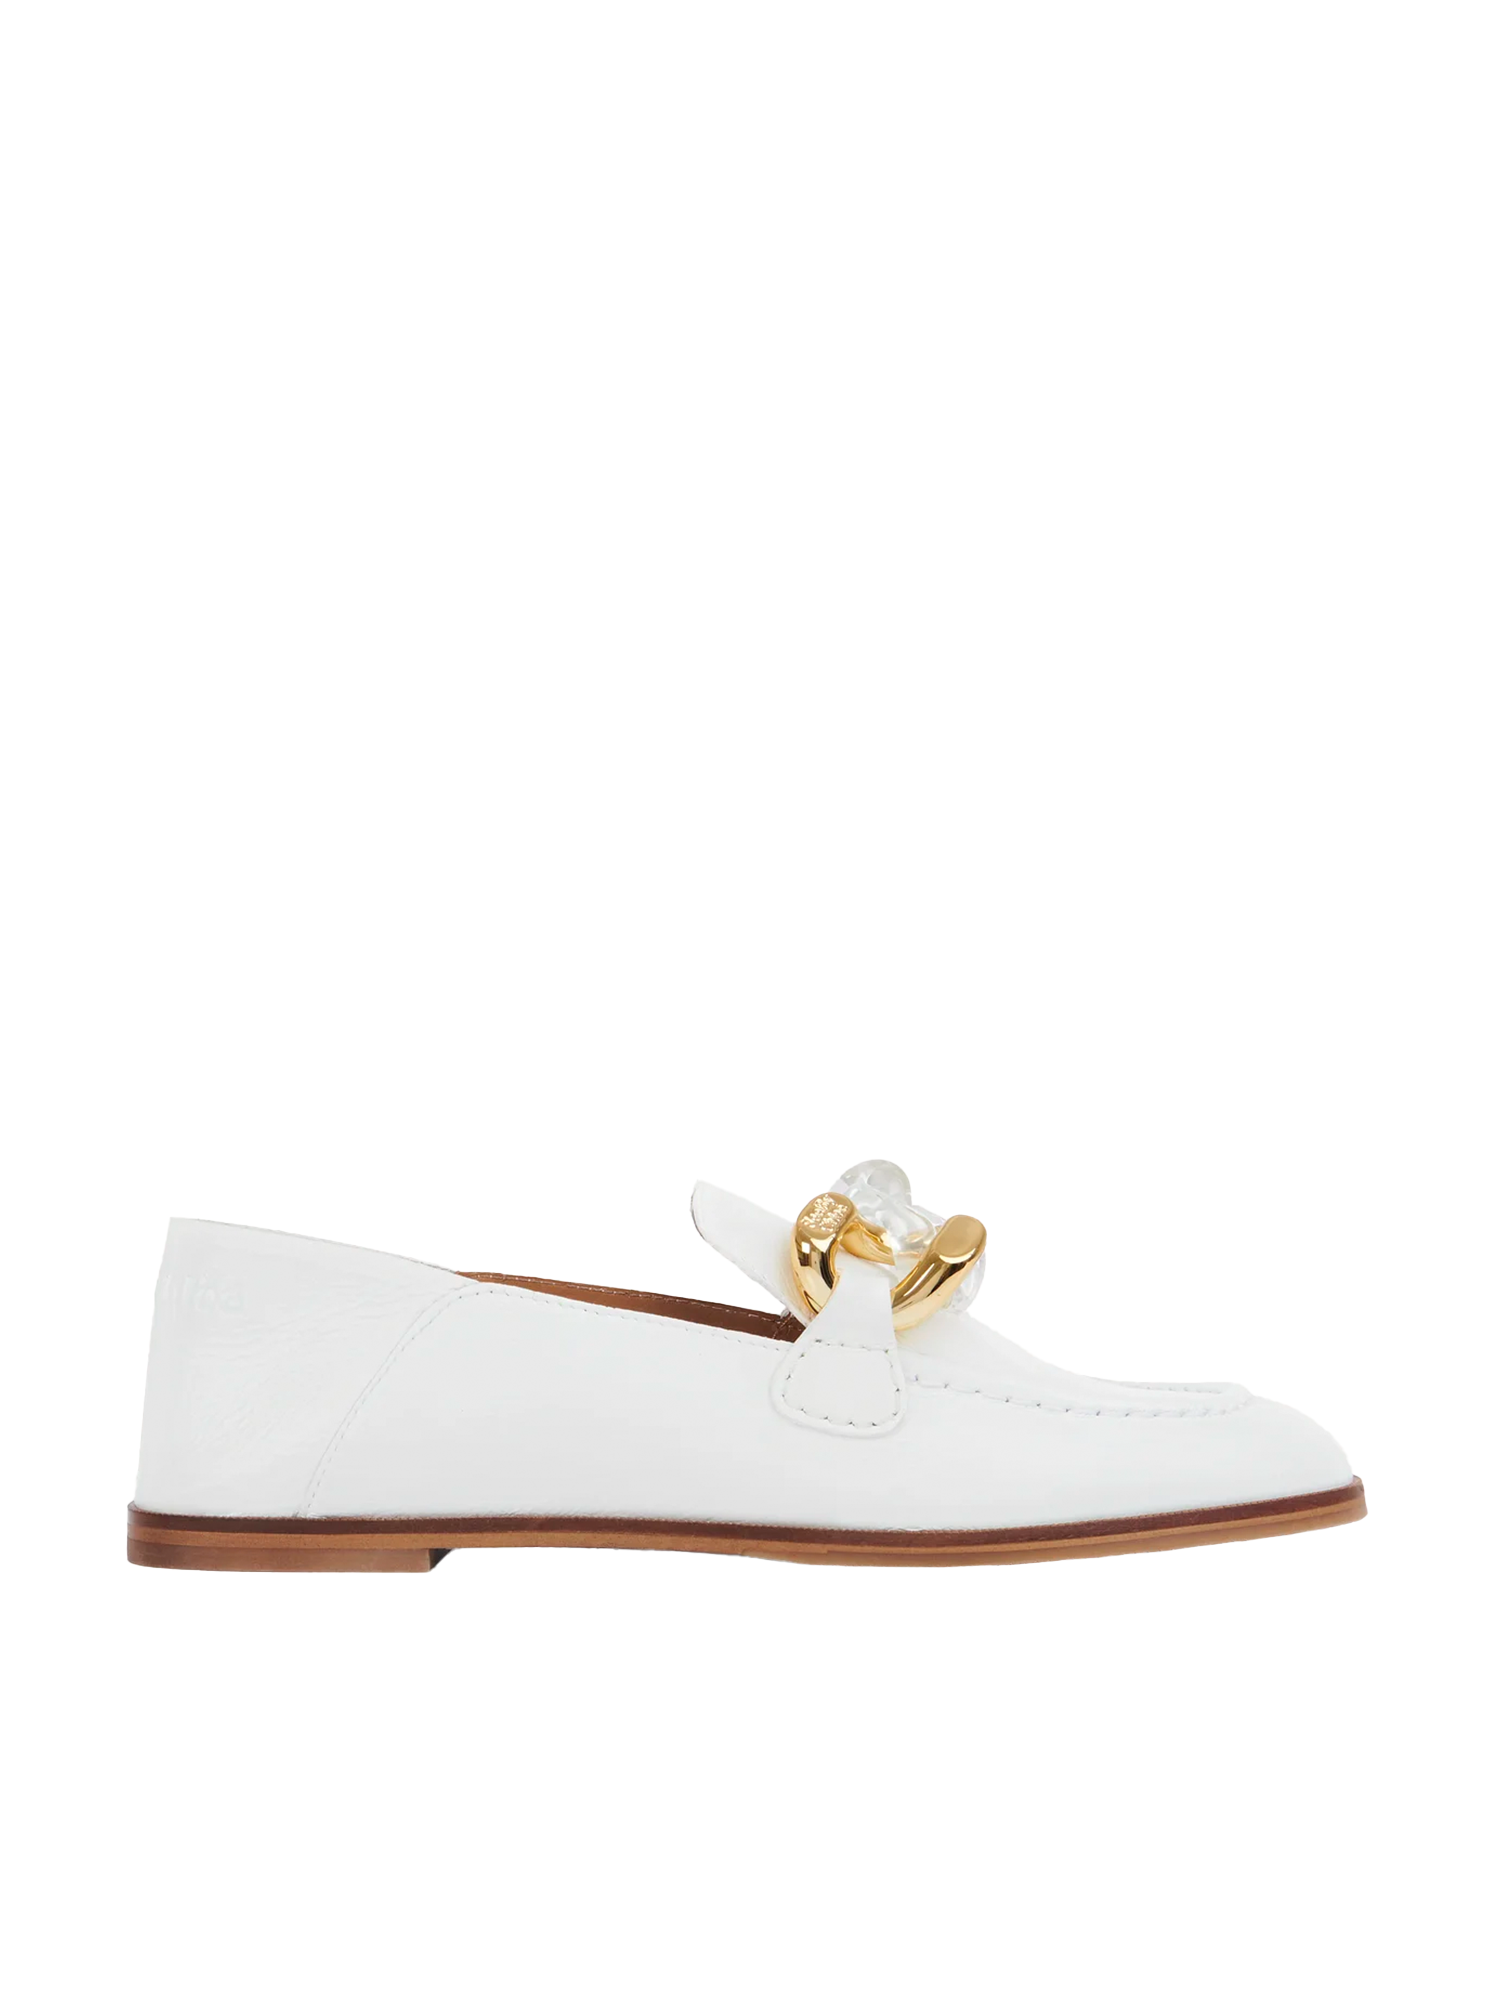 See by Chloé Dandy Leather Loafers